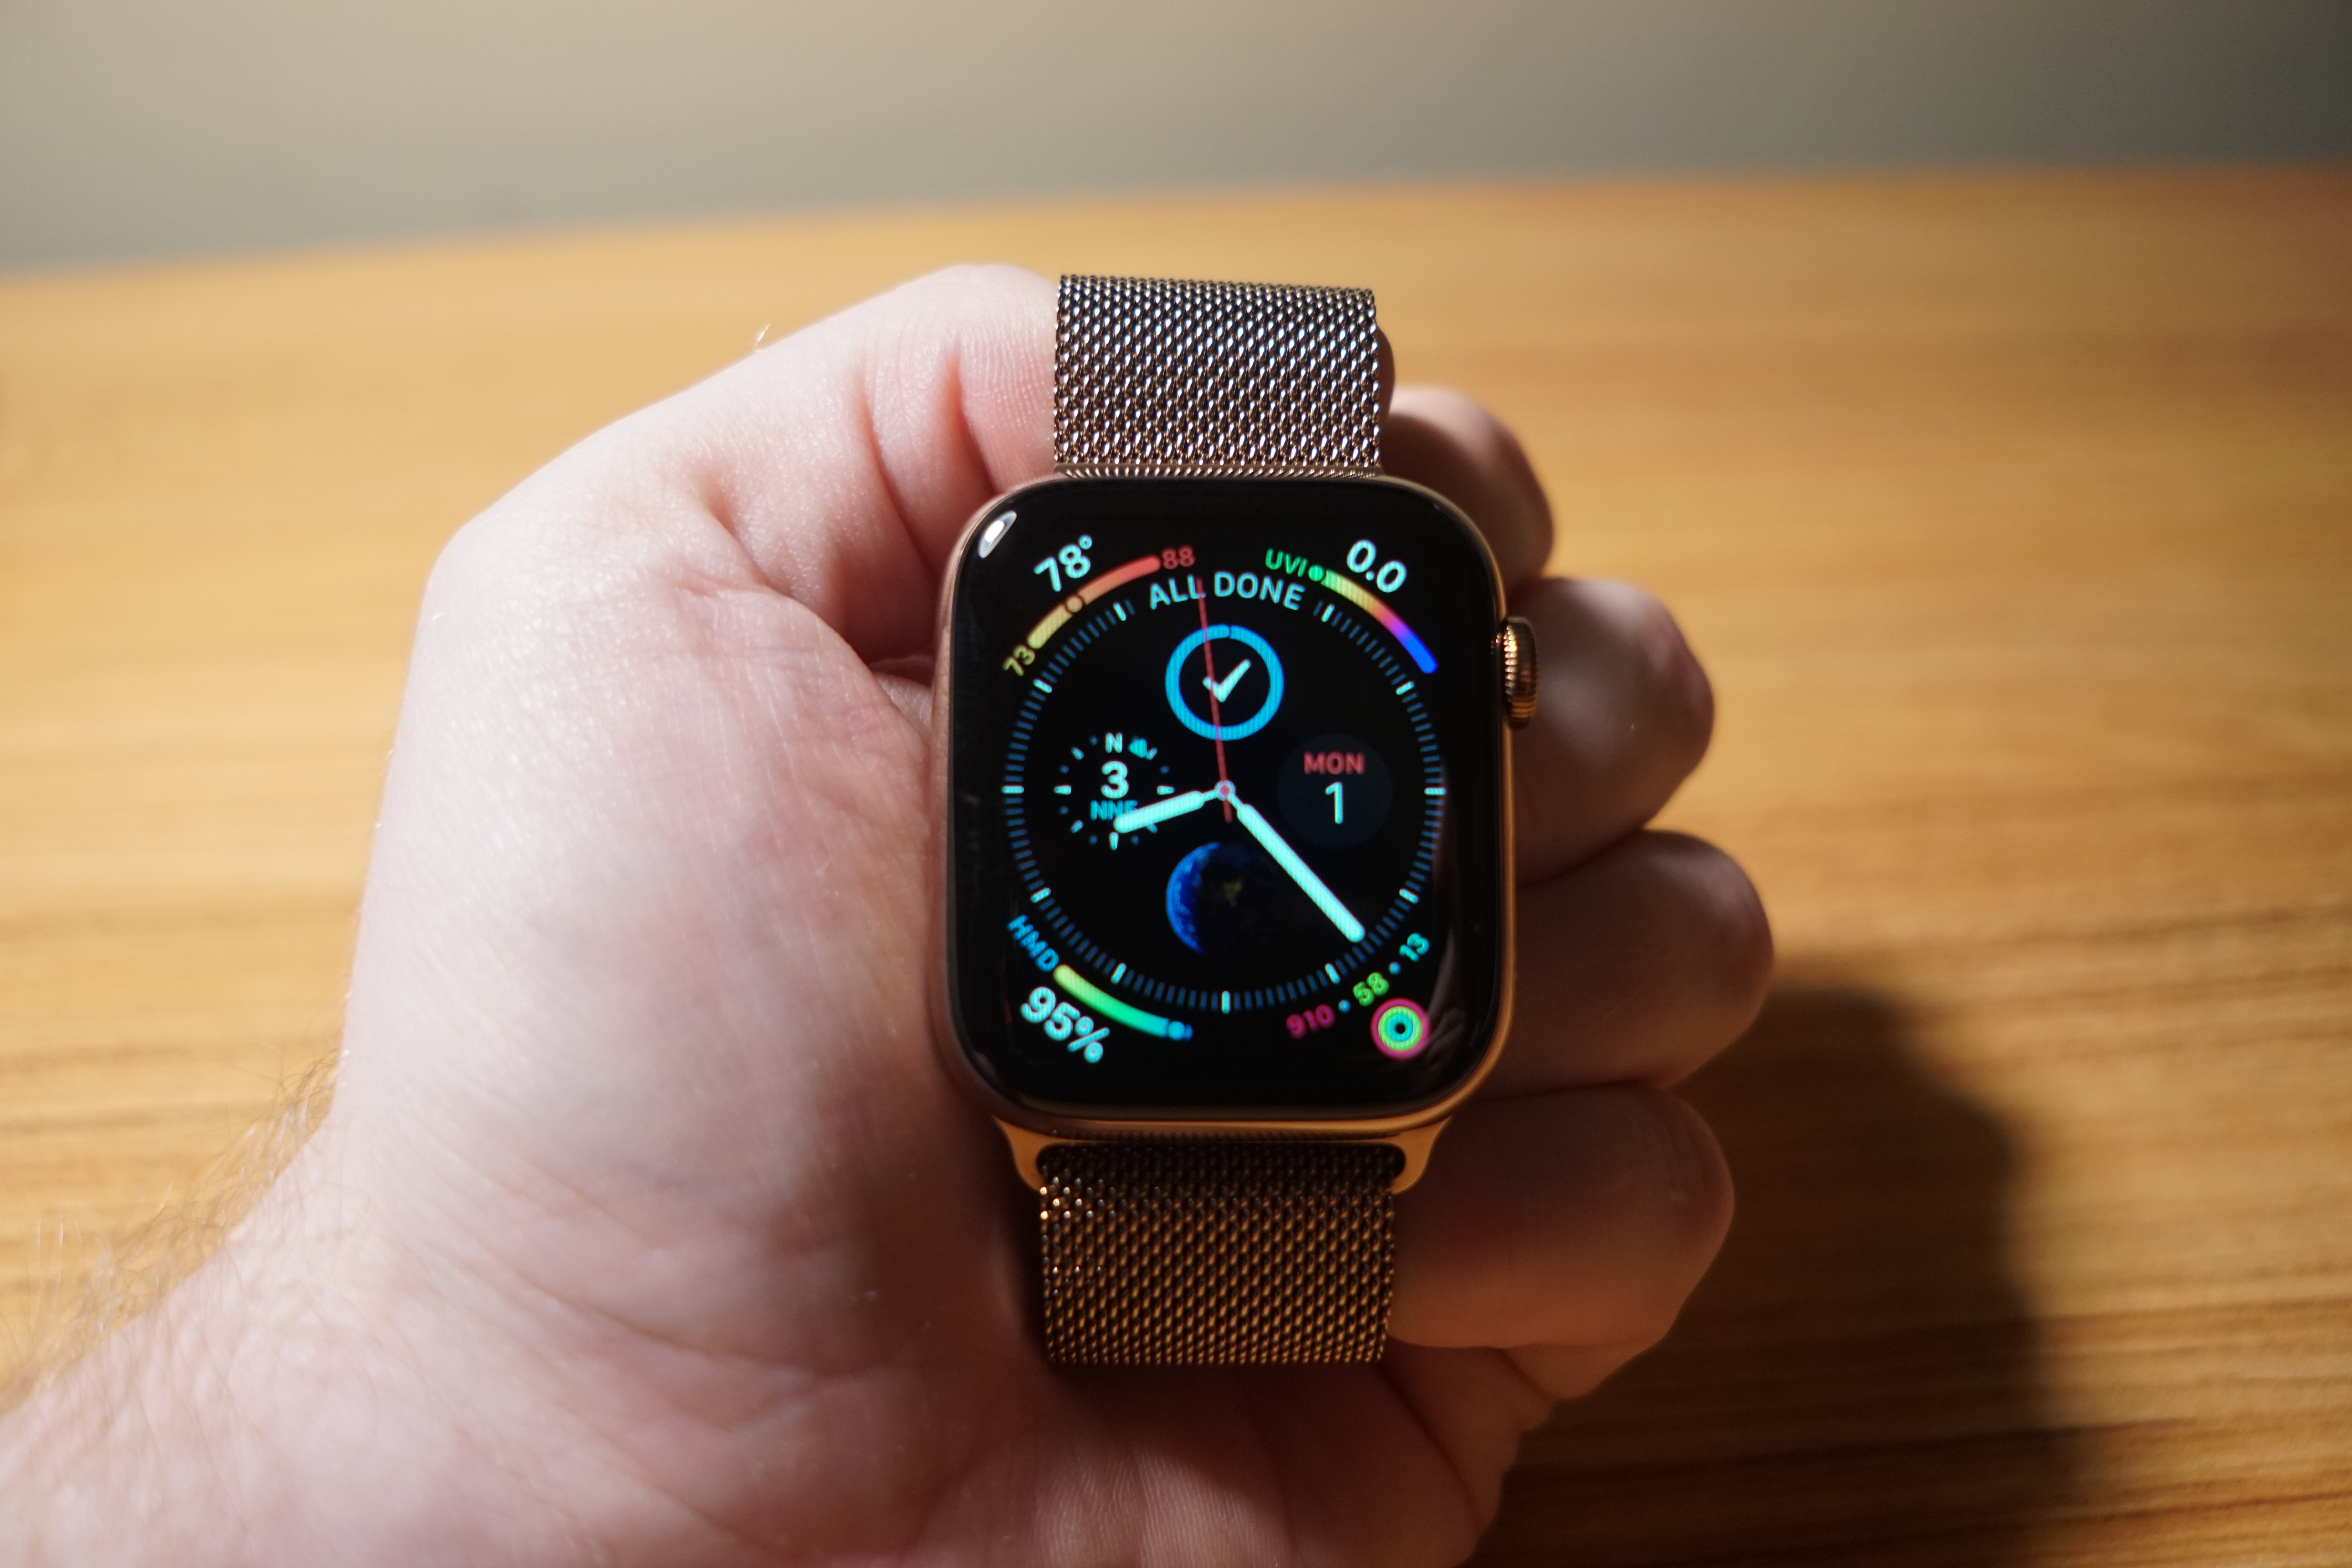 apple watch s4 stainless steel